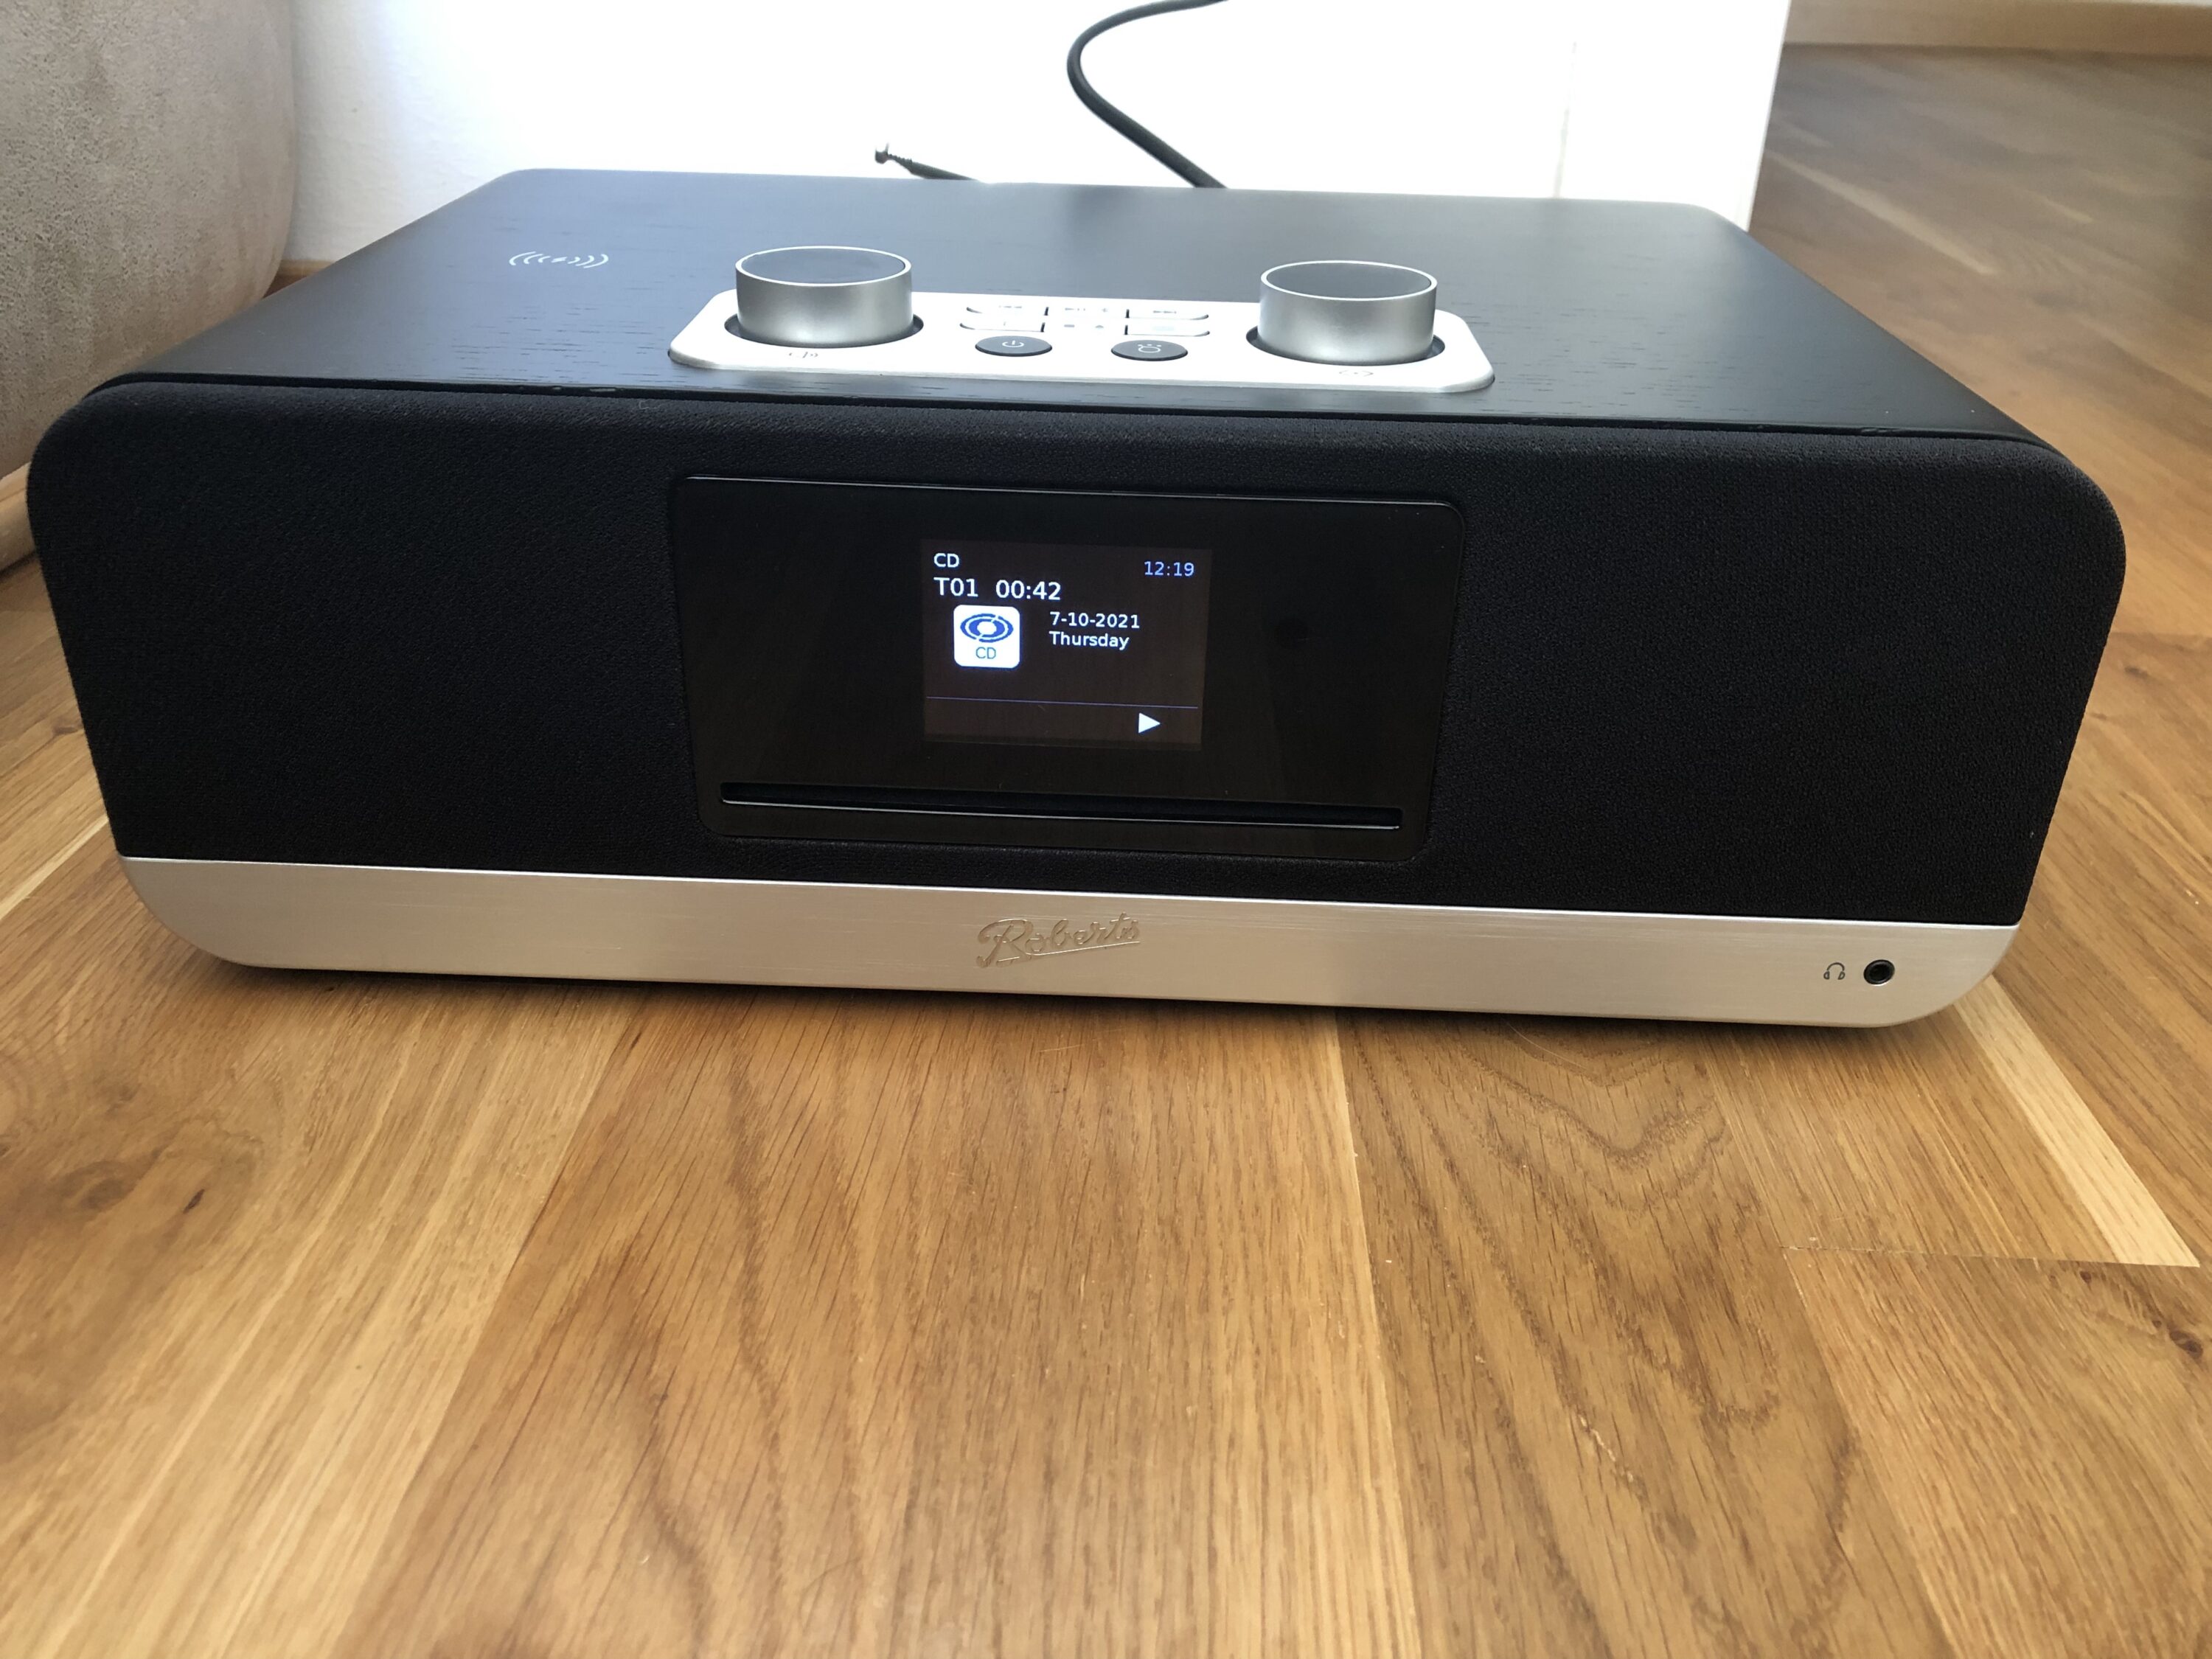 review: Roberts radio State-of-the-art BluTune technology? 300